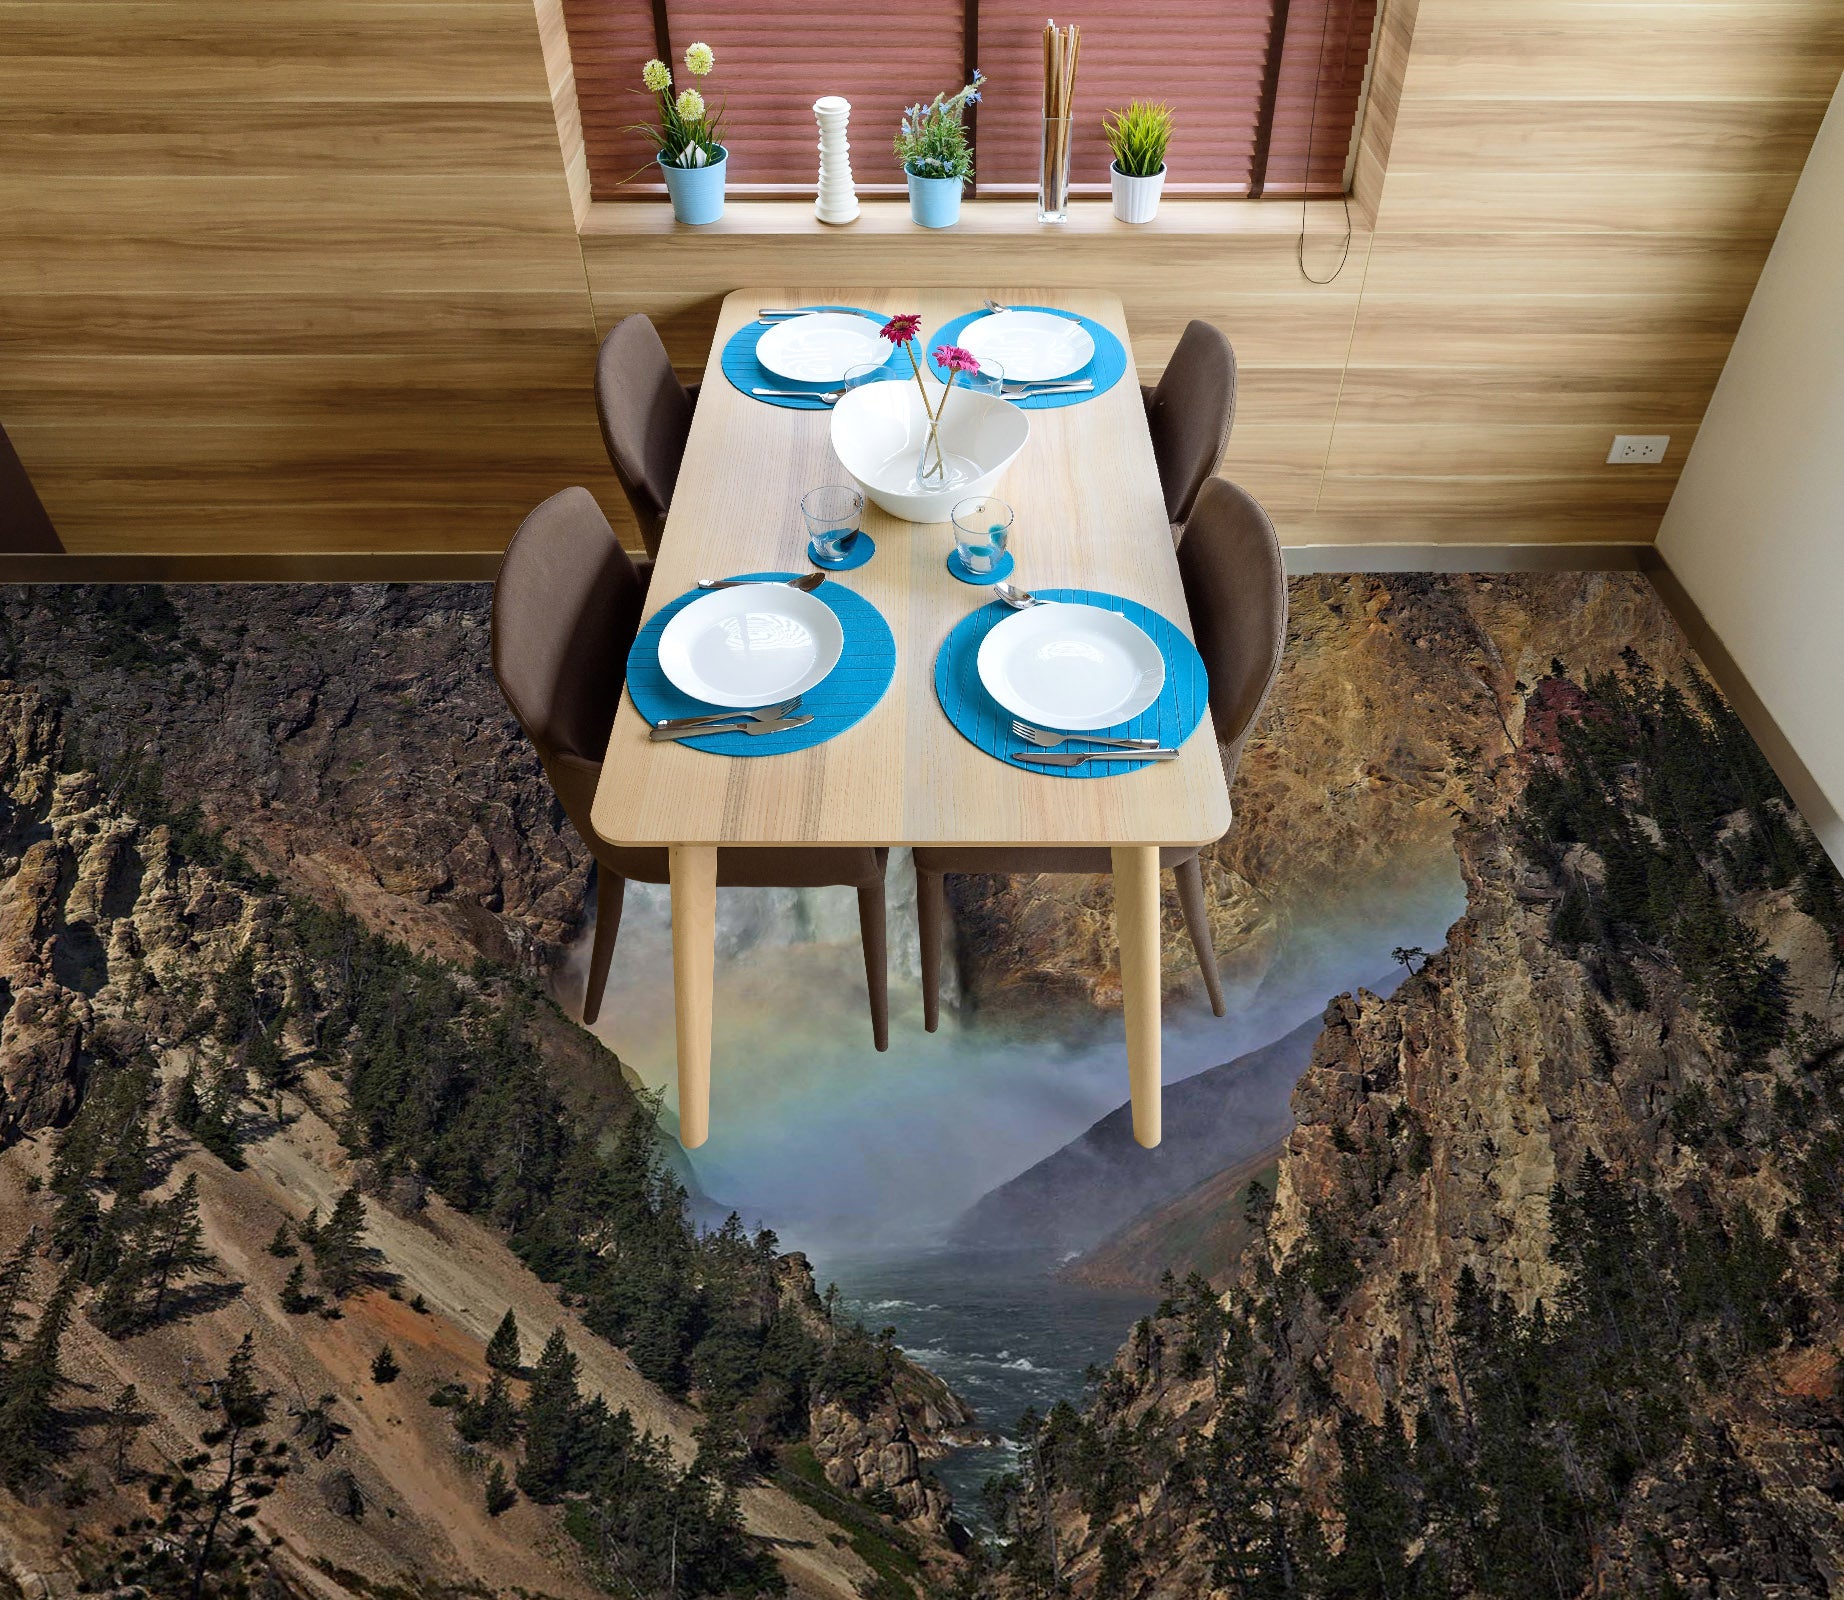 3D Mountains Trees 98190 Kathy Barefield Floor Mural  Wallpaper Murals Self-Adhesive Removable Print Epoxy